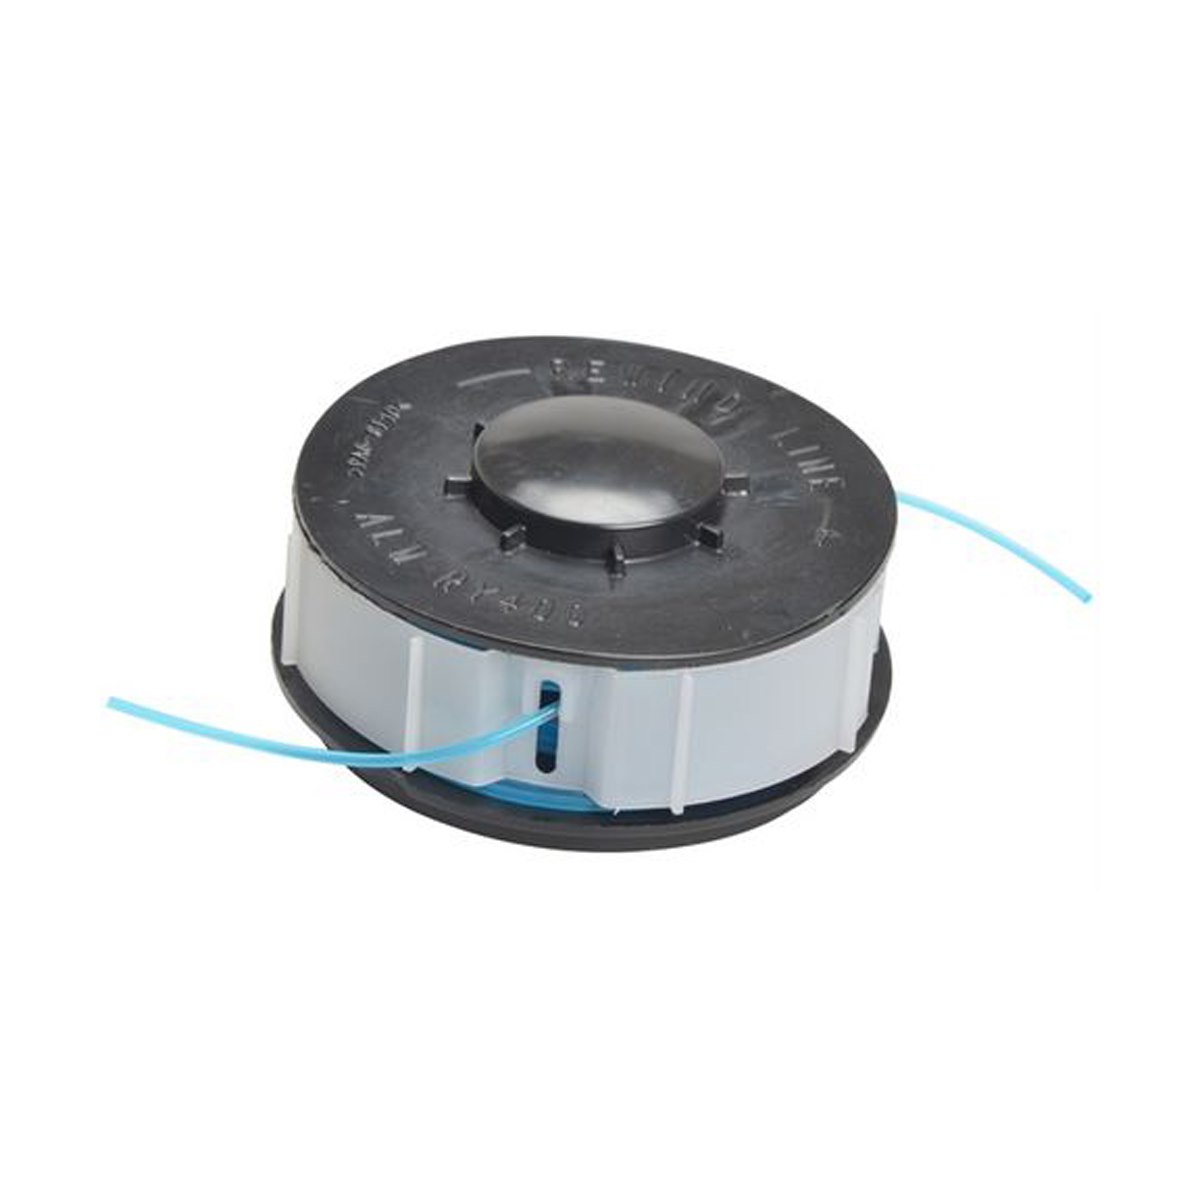 ALM RY400 Replacement Spool and Line for Landxcape,Performance Power, Sovereign